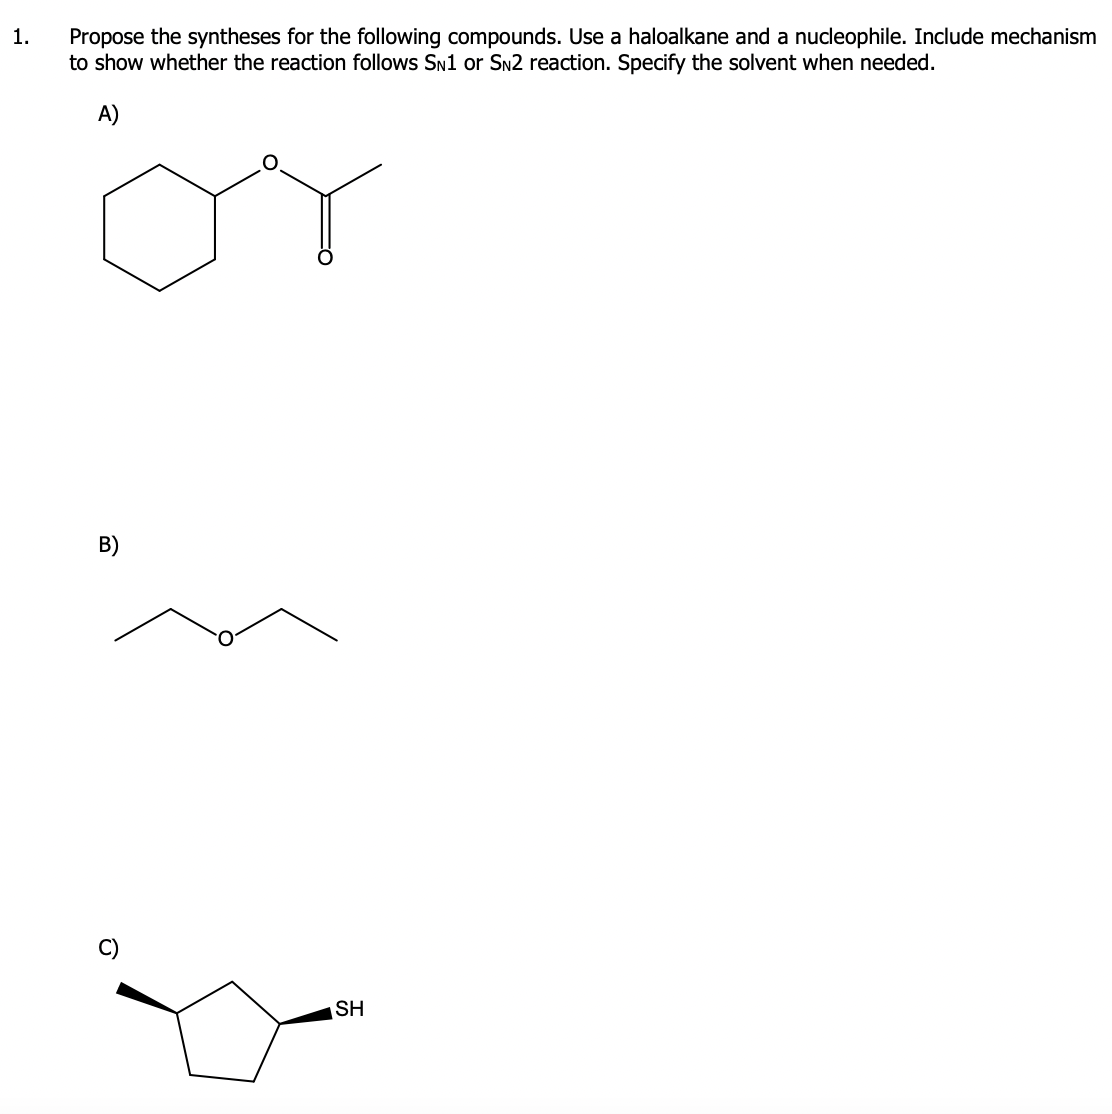 1.
Propose the syntheses for the following compounds. Use a haloalkane and a nucleophile. Include mechanism
to show whether the reaction follows SN1 or SN2 reaction. Specify the solvent when needed.
A)
or
B)
SH